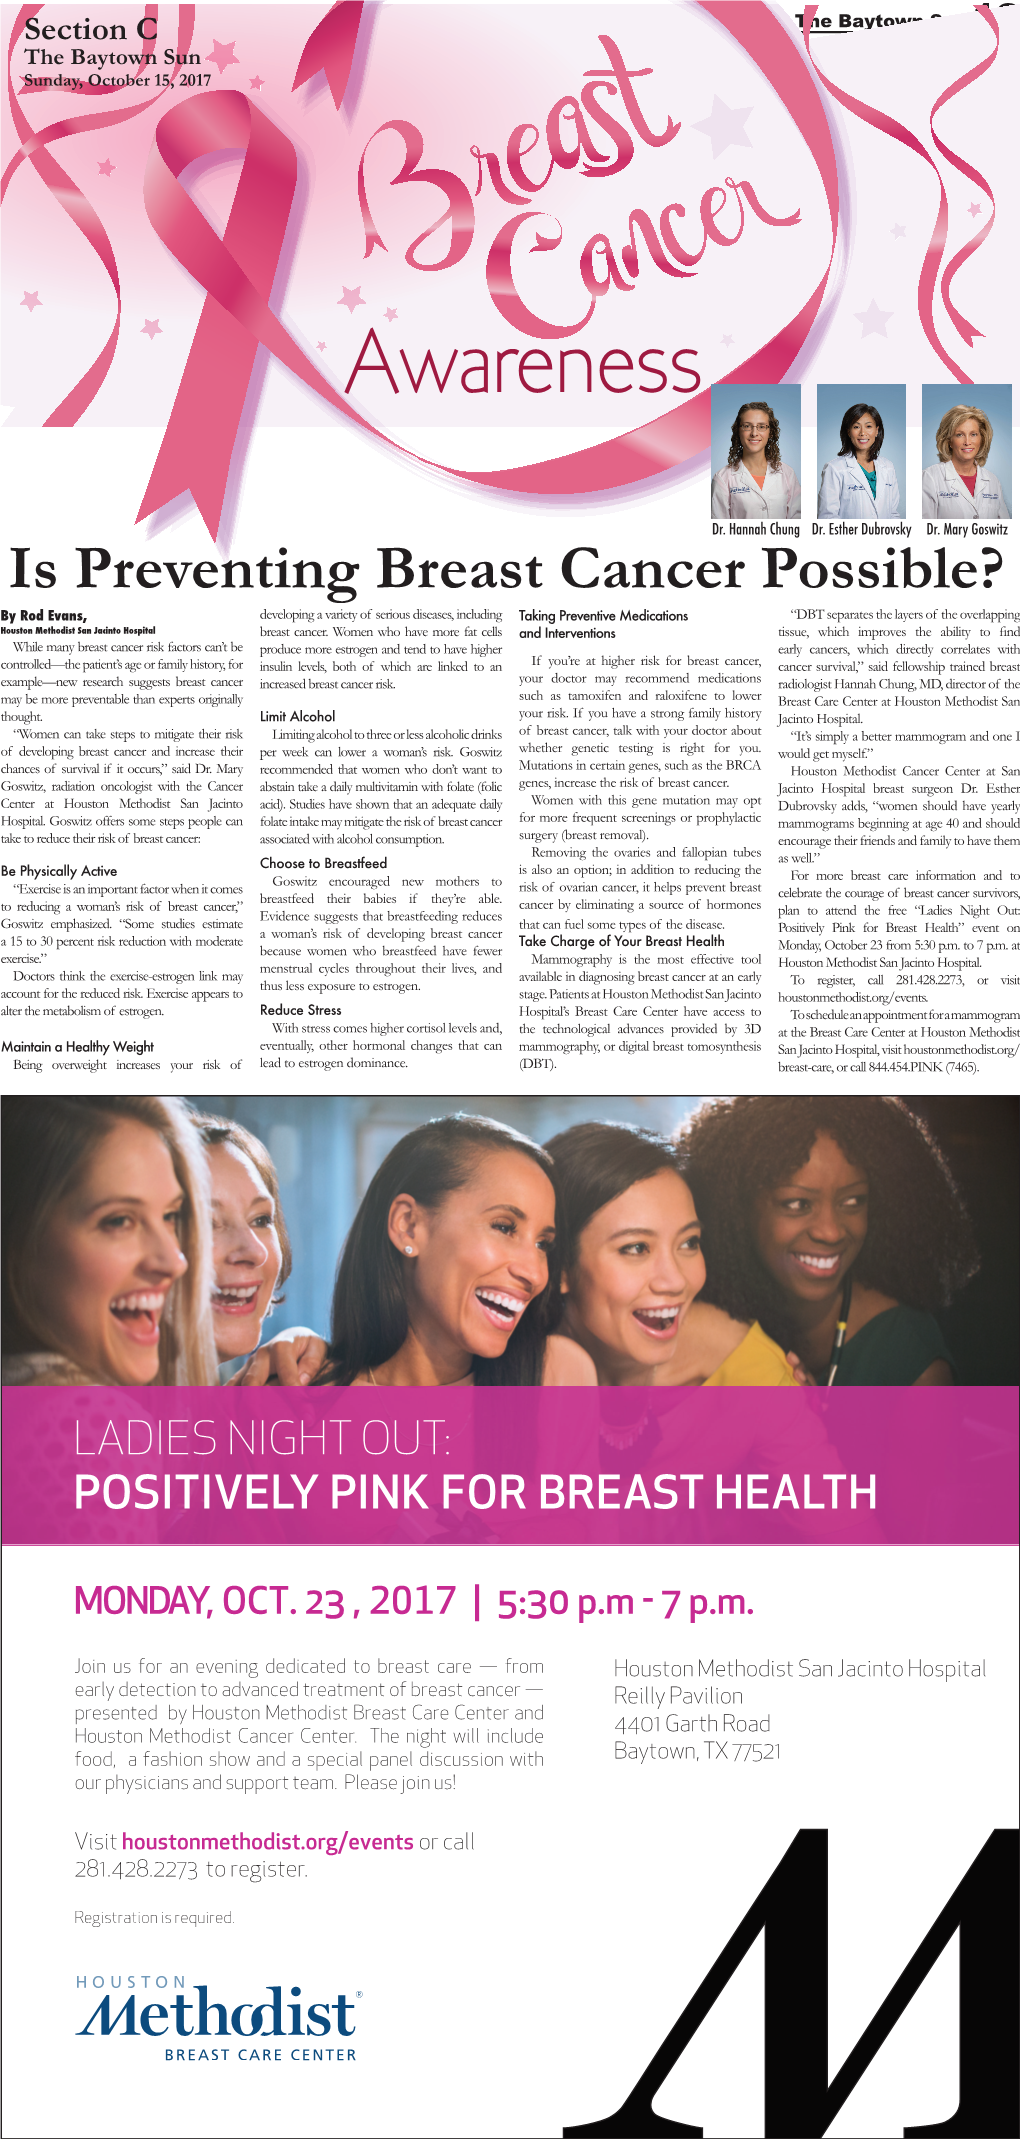 Is Preventing Breast Cancer Possible?